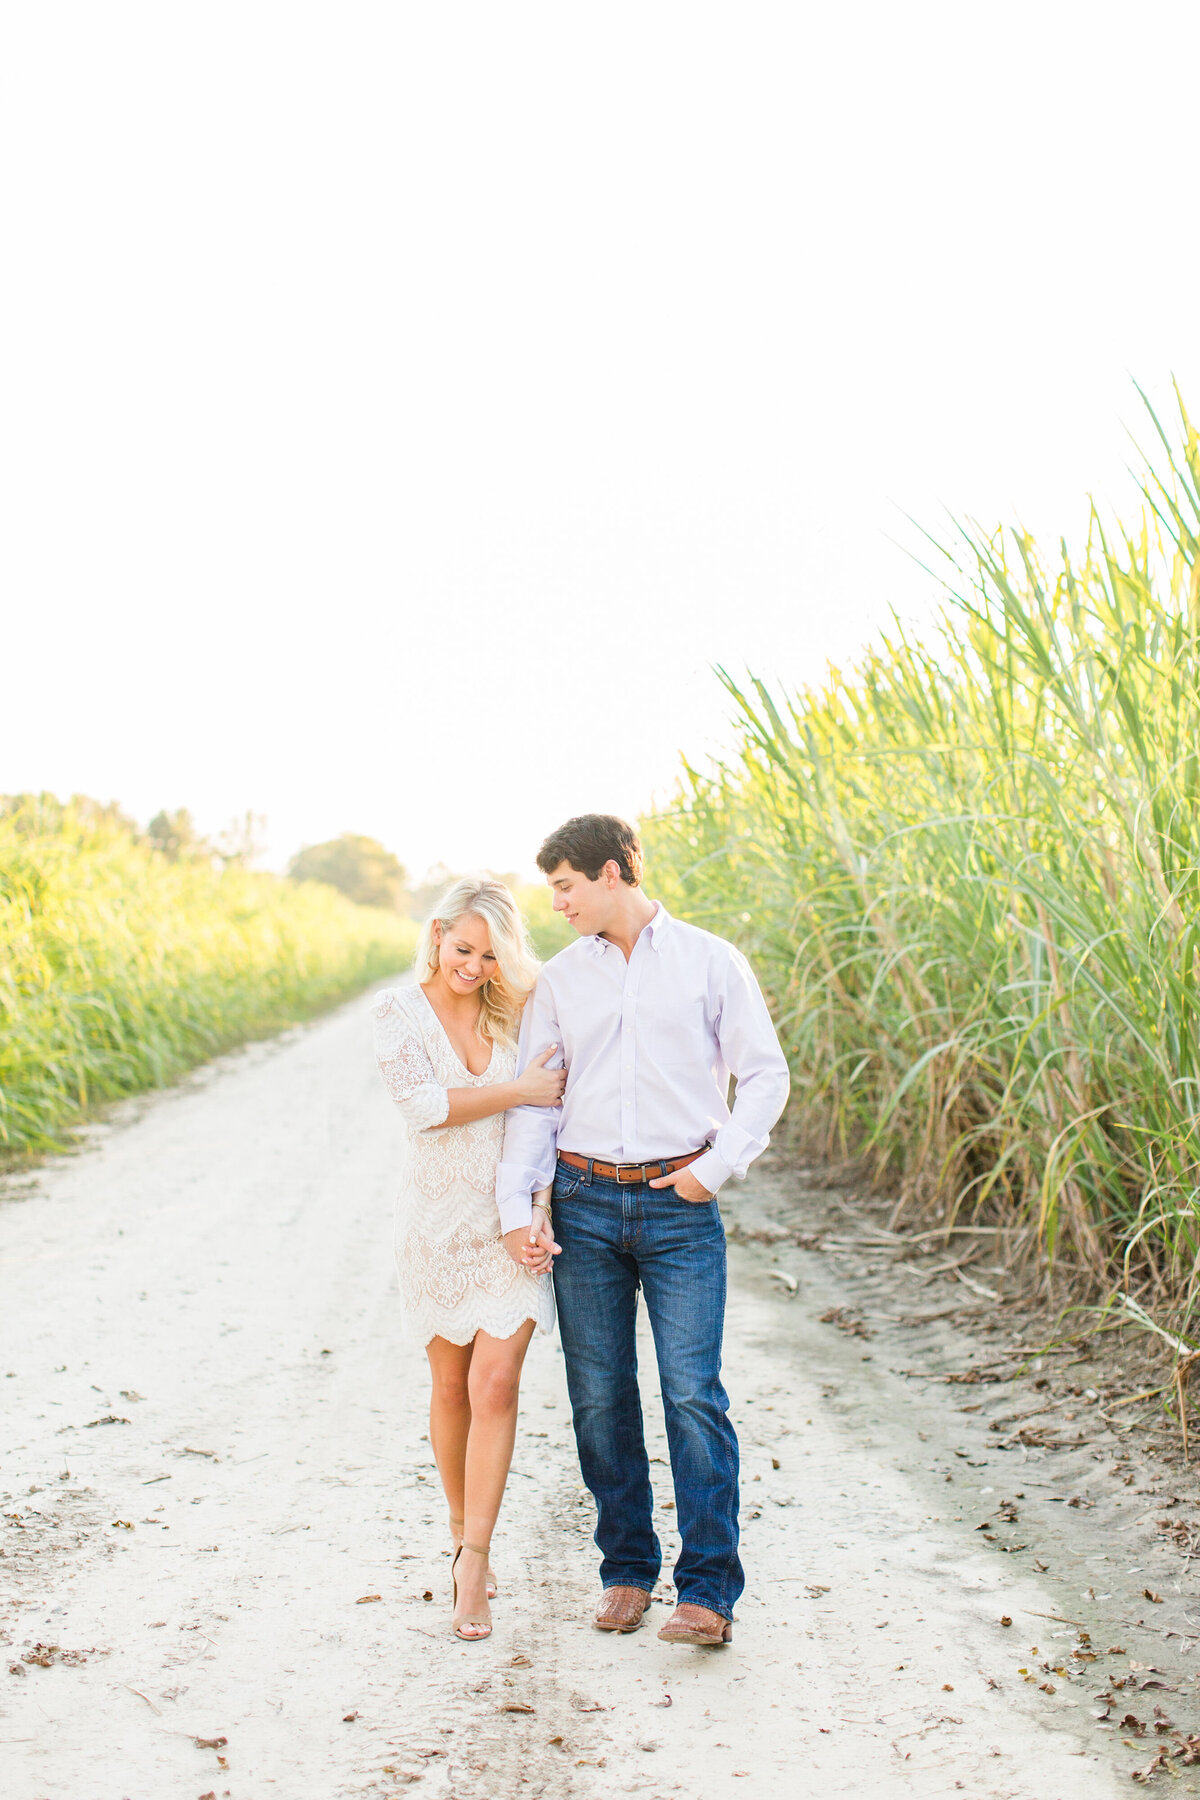 Renee Lorio Photography South Louisiana Wedding Engagement Light Airy Portrait Photographer Photos Southern Clean Colorful18